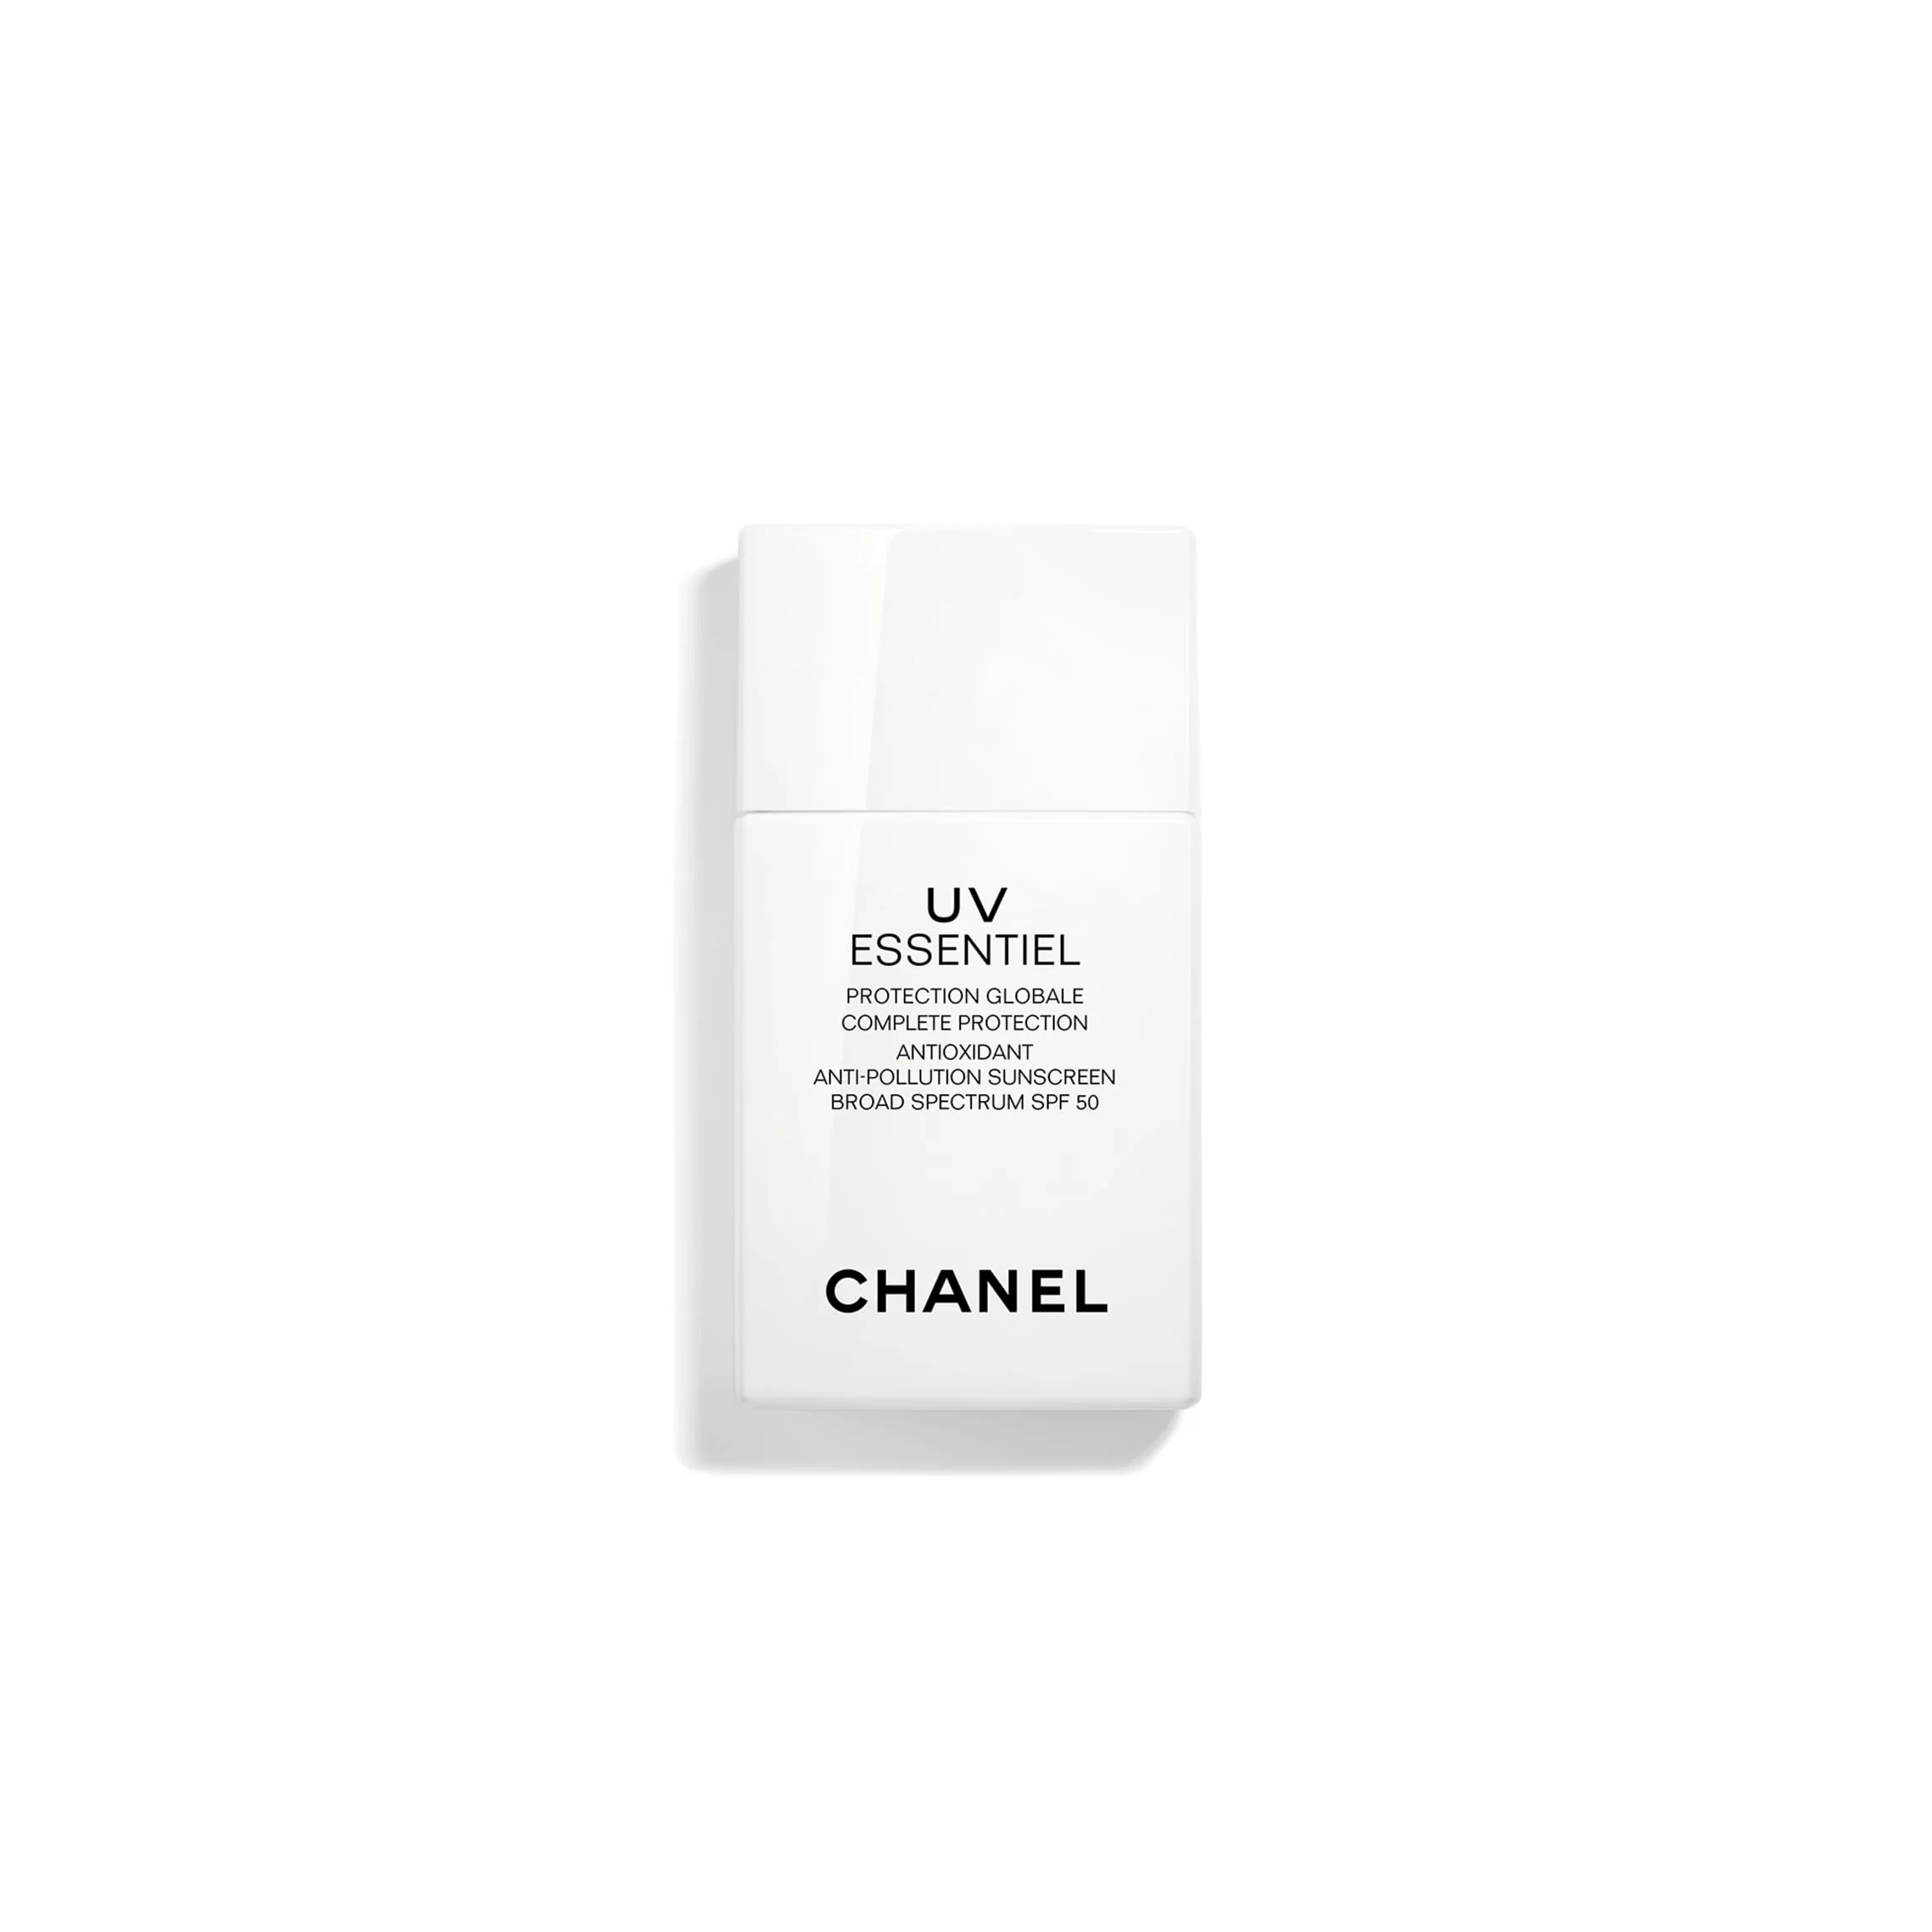 CHANEL BEAUTY Community on Instagram: Spending the day poolside? Don't  forget to shield your skin with the new UV ESSENTIEL Complete UV Protection  Sunscreen, a lightweight formula that absorbs seamlessly, without leaving